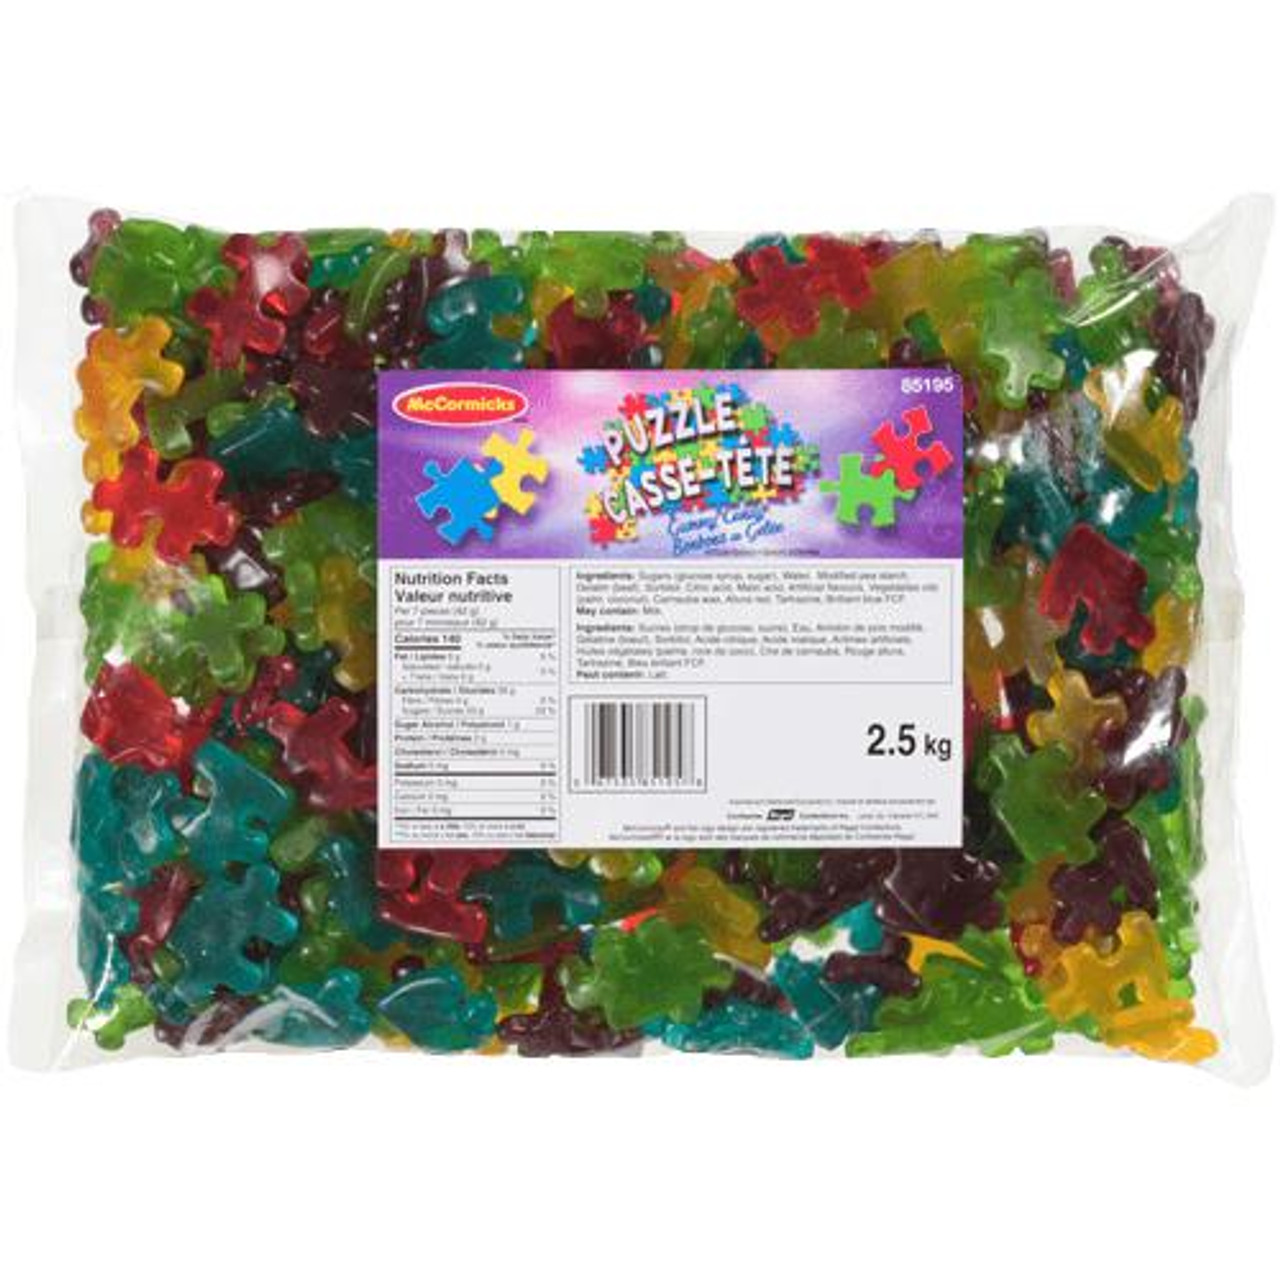  MCCORMICKS Puzzle Gummy Candy 2.5kg/5.51lbs - Sweet and Playful Delights 